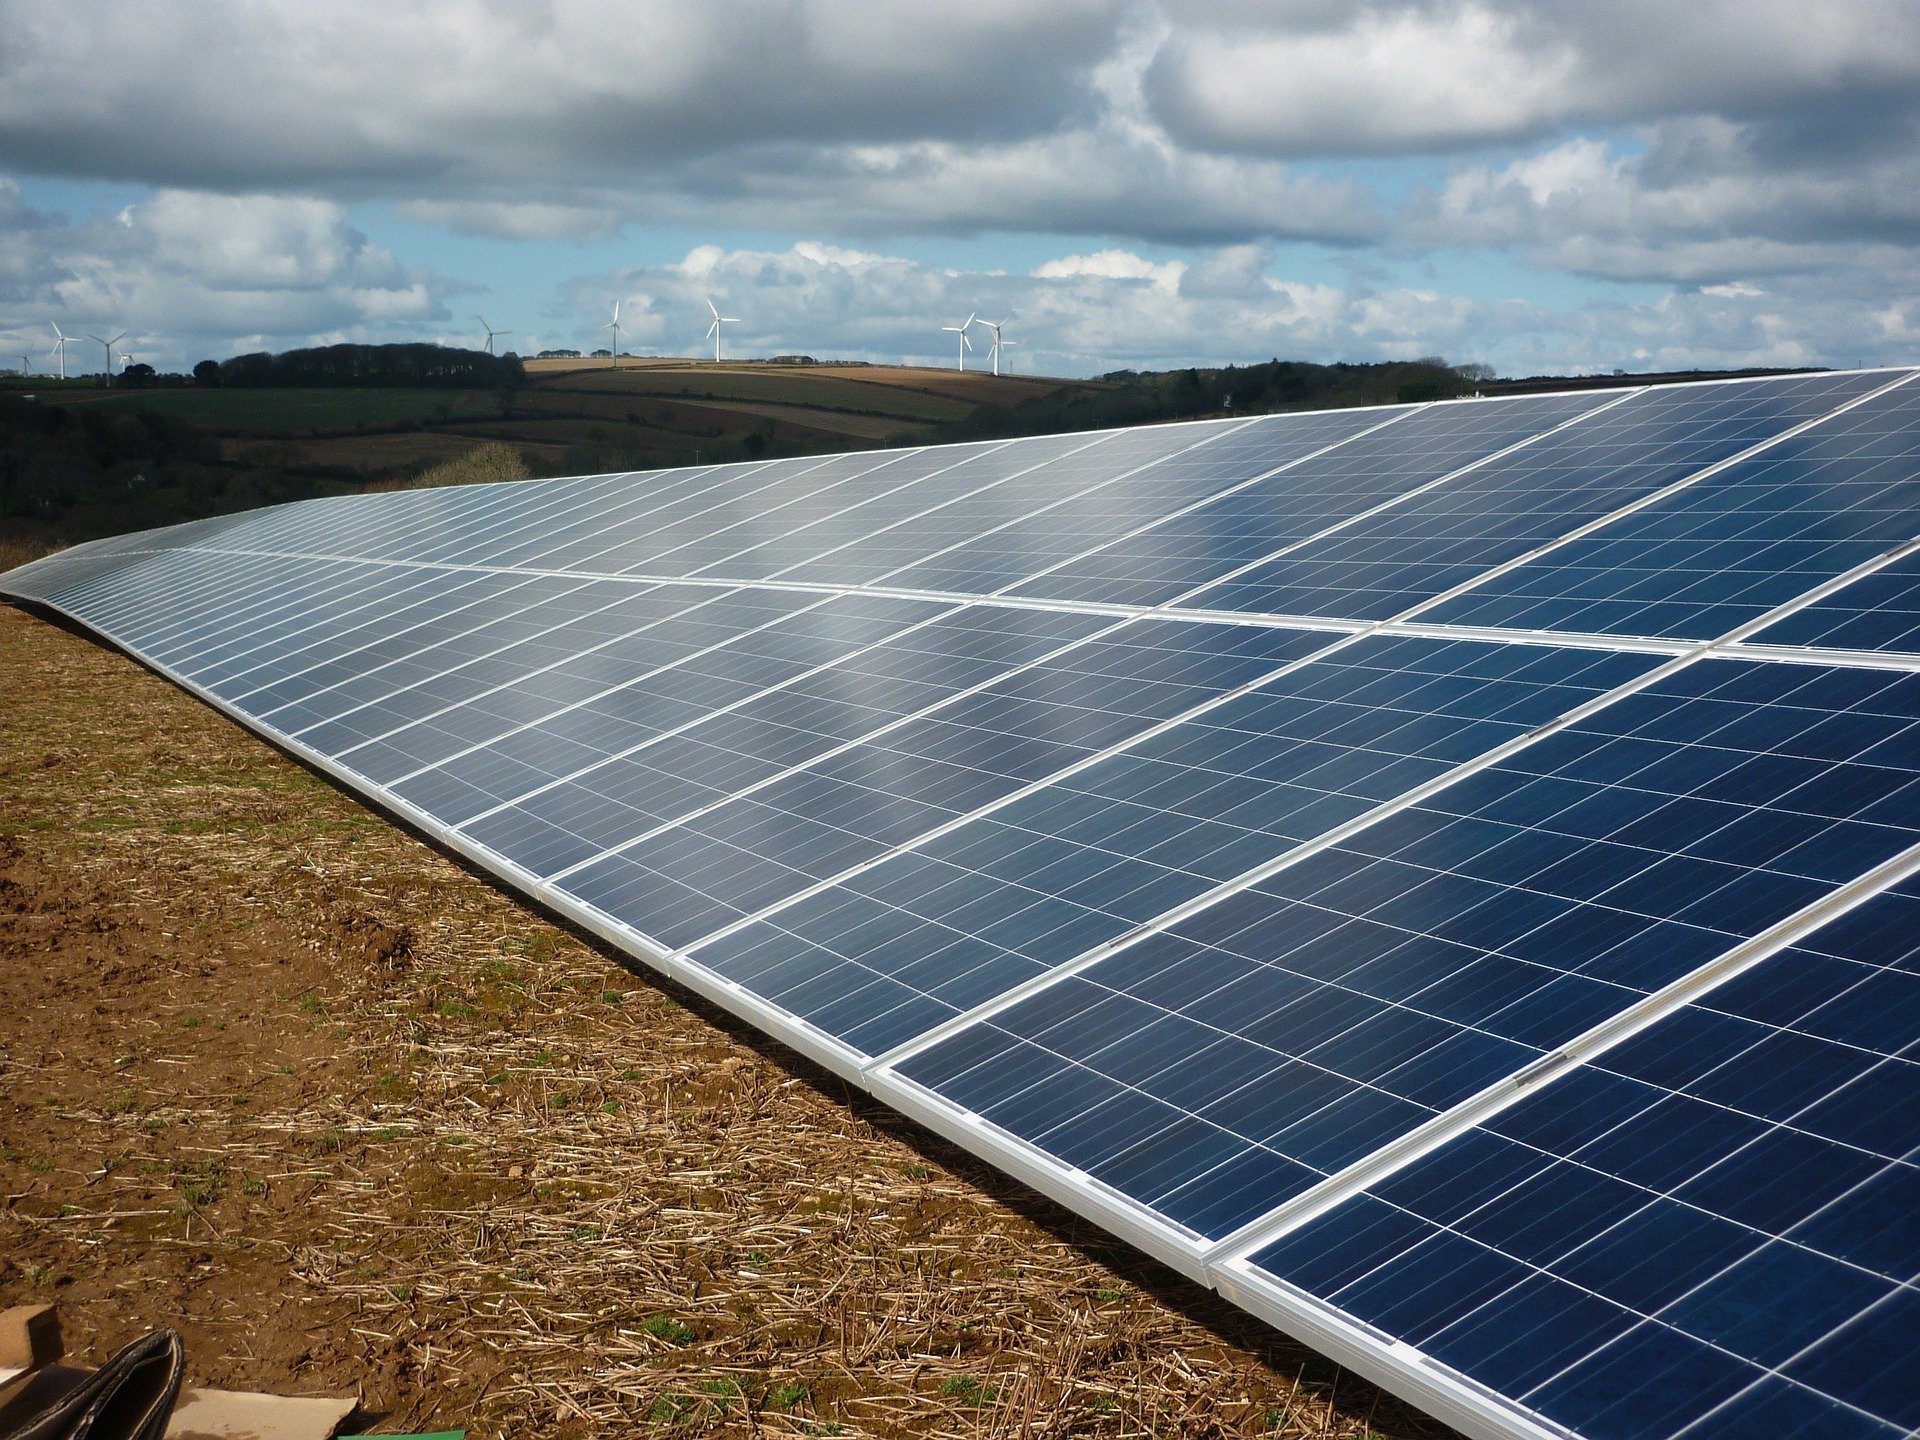 An example of solar panels in the countryside. Credit: Pixabay